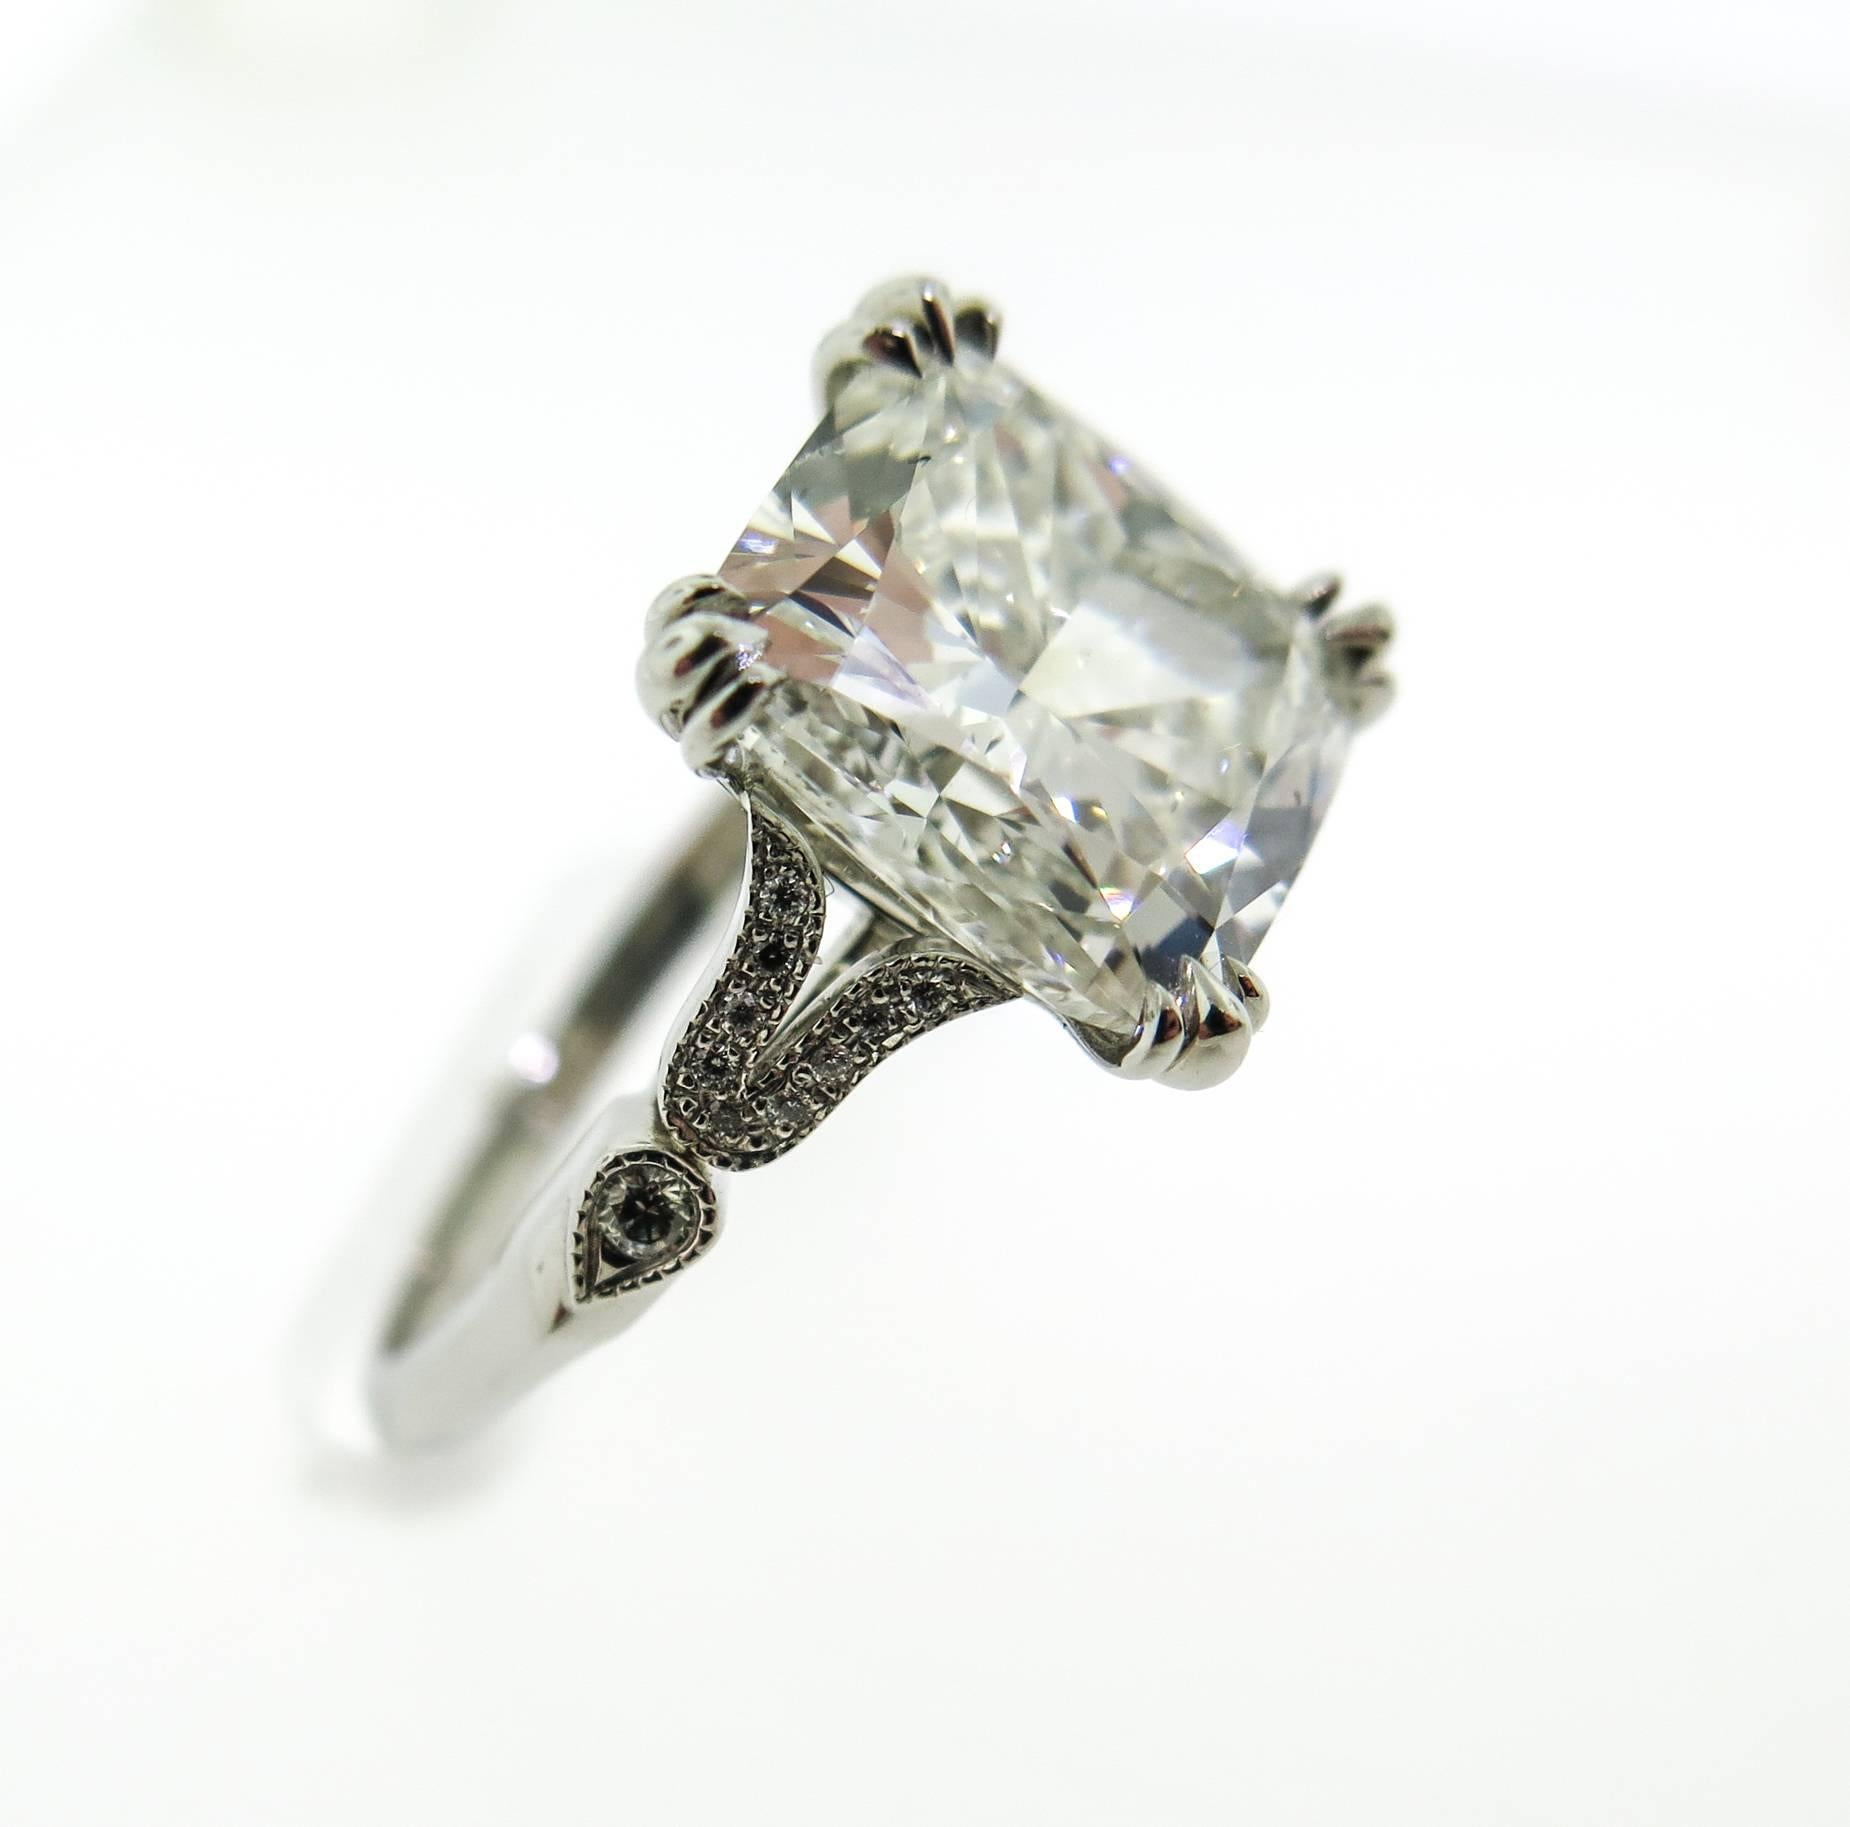 This extraordinary cushion cut diamond vintage inspired diamond engagement ring looks stunning. Weighing 5.02 carats, G color, SI1 clarity, it is absolutely out of this world and will instantly take your breathe away! Hand made and mounted in